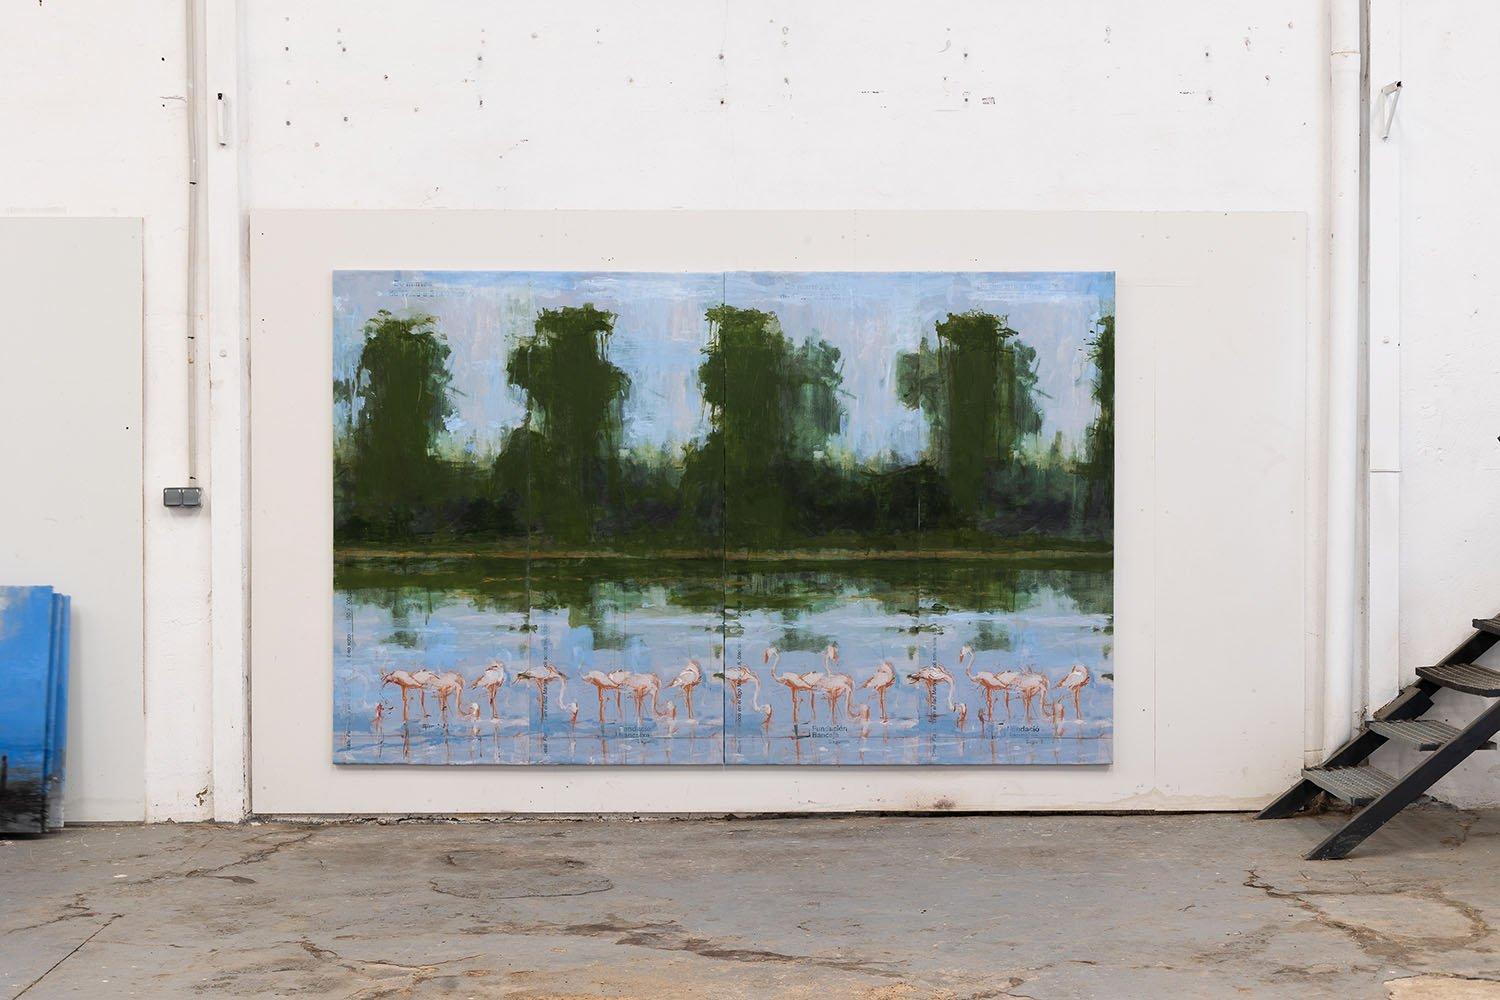 Manyara Lake No.4 is a unique painting by Spanish contemporary artist Calo Carratalá, it is made with acrylic on printed vinyl canvas mounted on wood frame, dimensions are 200 × 317 cm (78.7 × 124.8 in). This painting is composed of two panels each